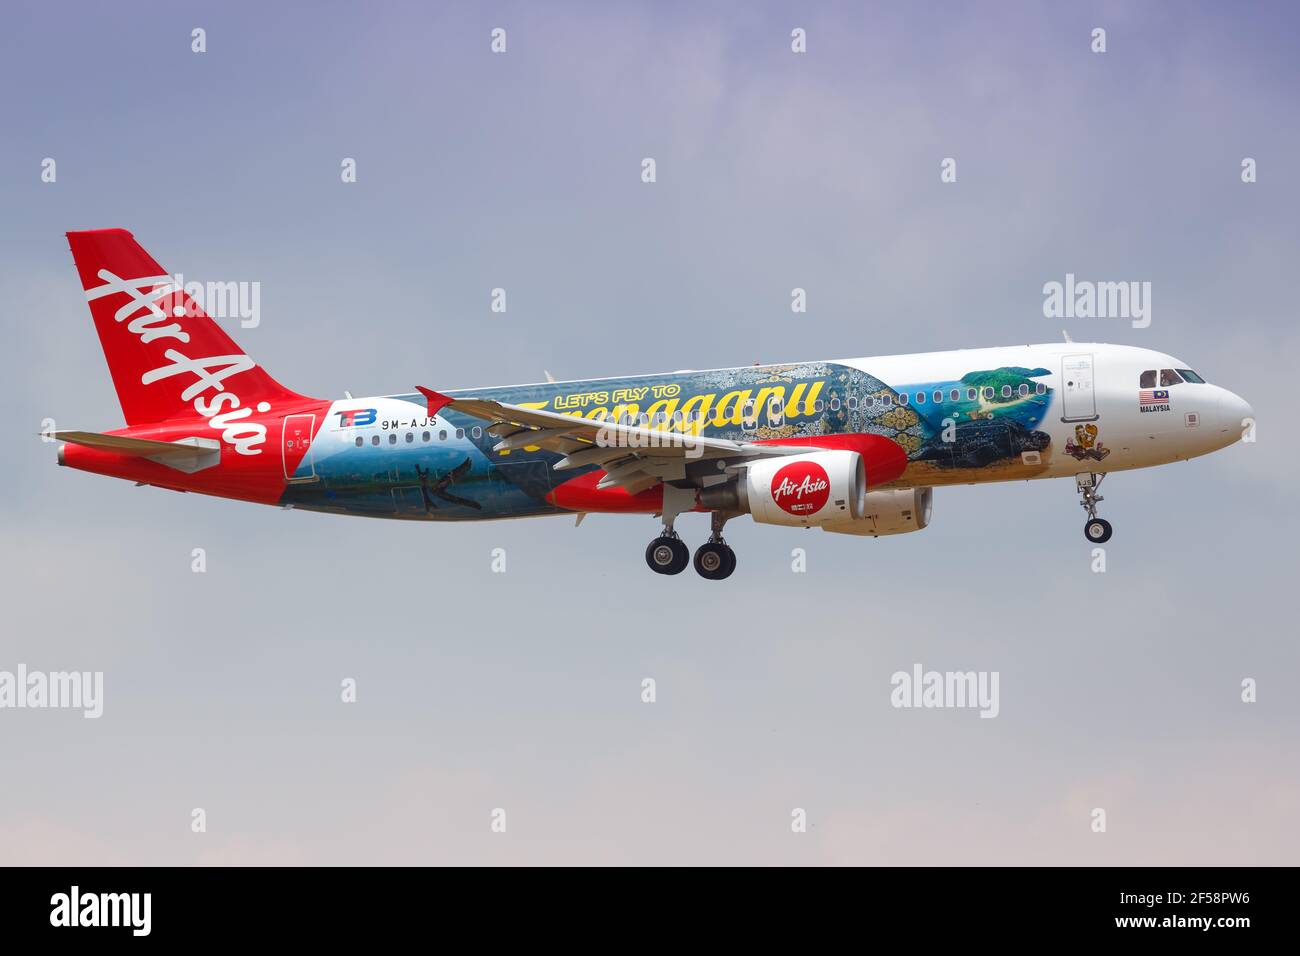 Kuala Lumpur, Malaysia – January 21, 2018: Air Asia Airbus A320 in the Let’s Fly to Terengganu special livery at Kuala Lumpur airport (KUL) in Malaysi Stock Photo